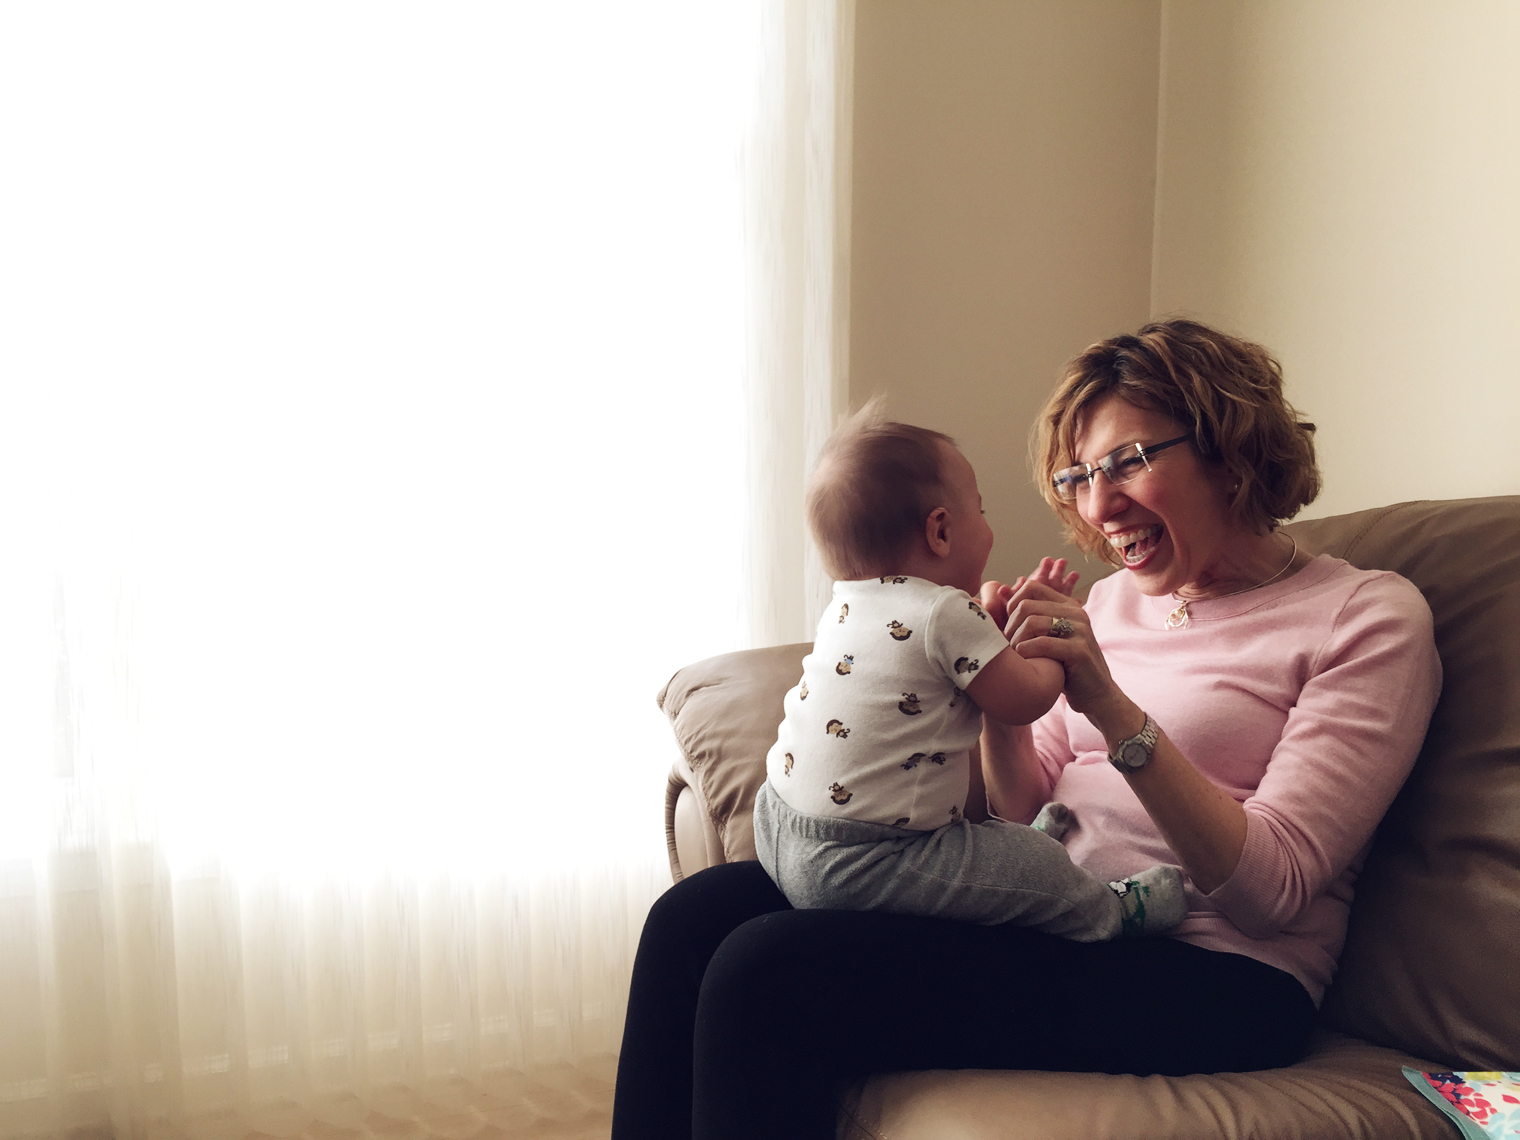 grandmother playing with baby by window for washington dc advertising photography